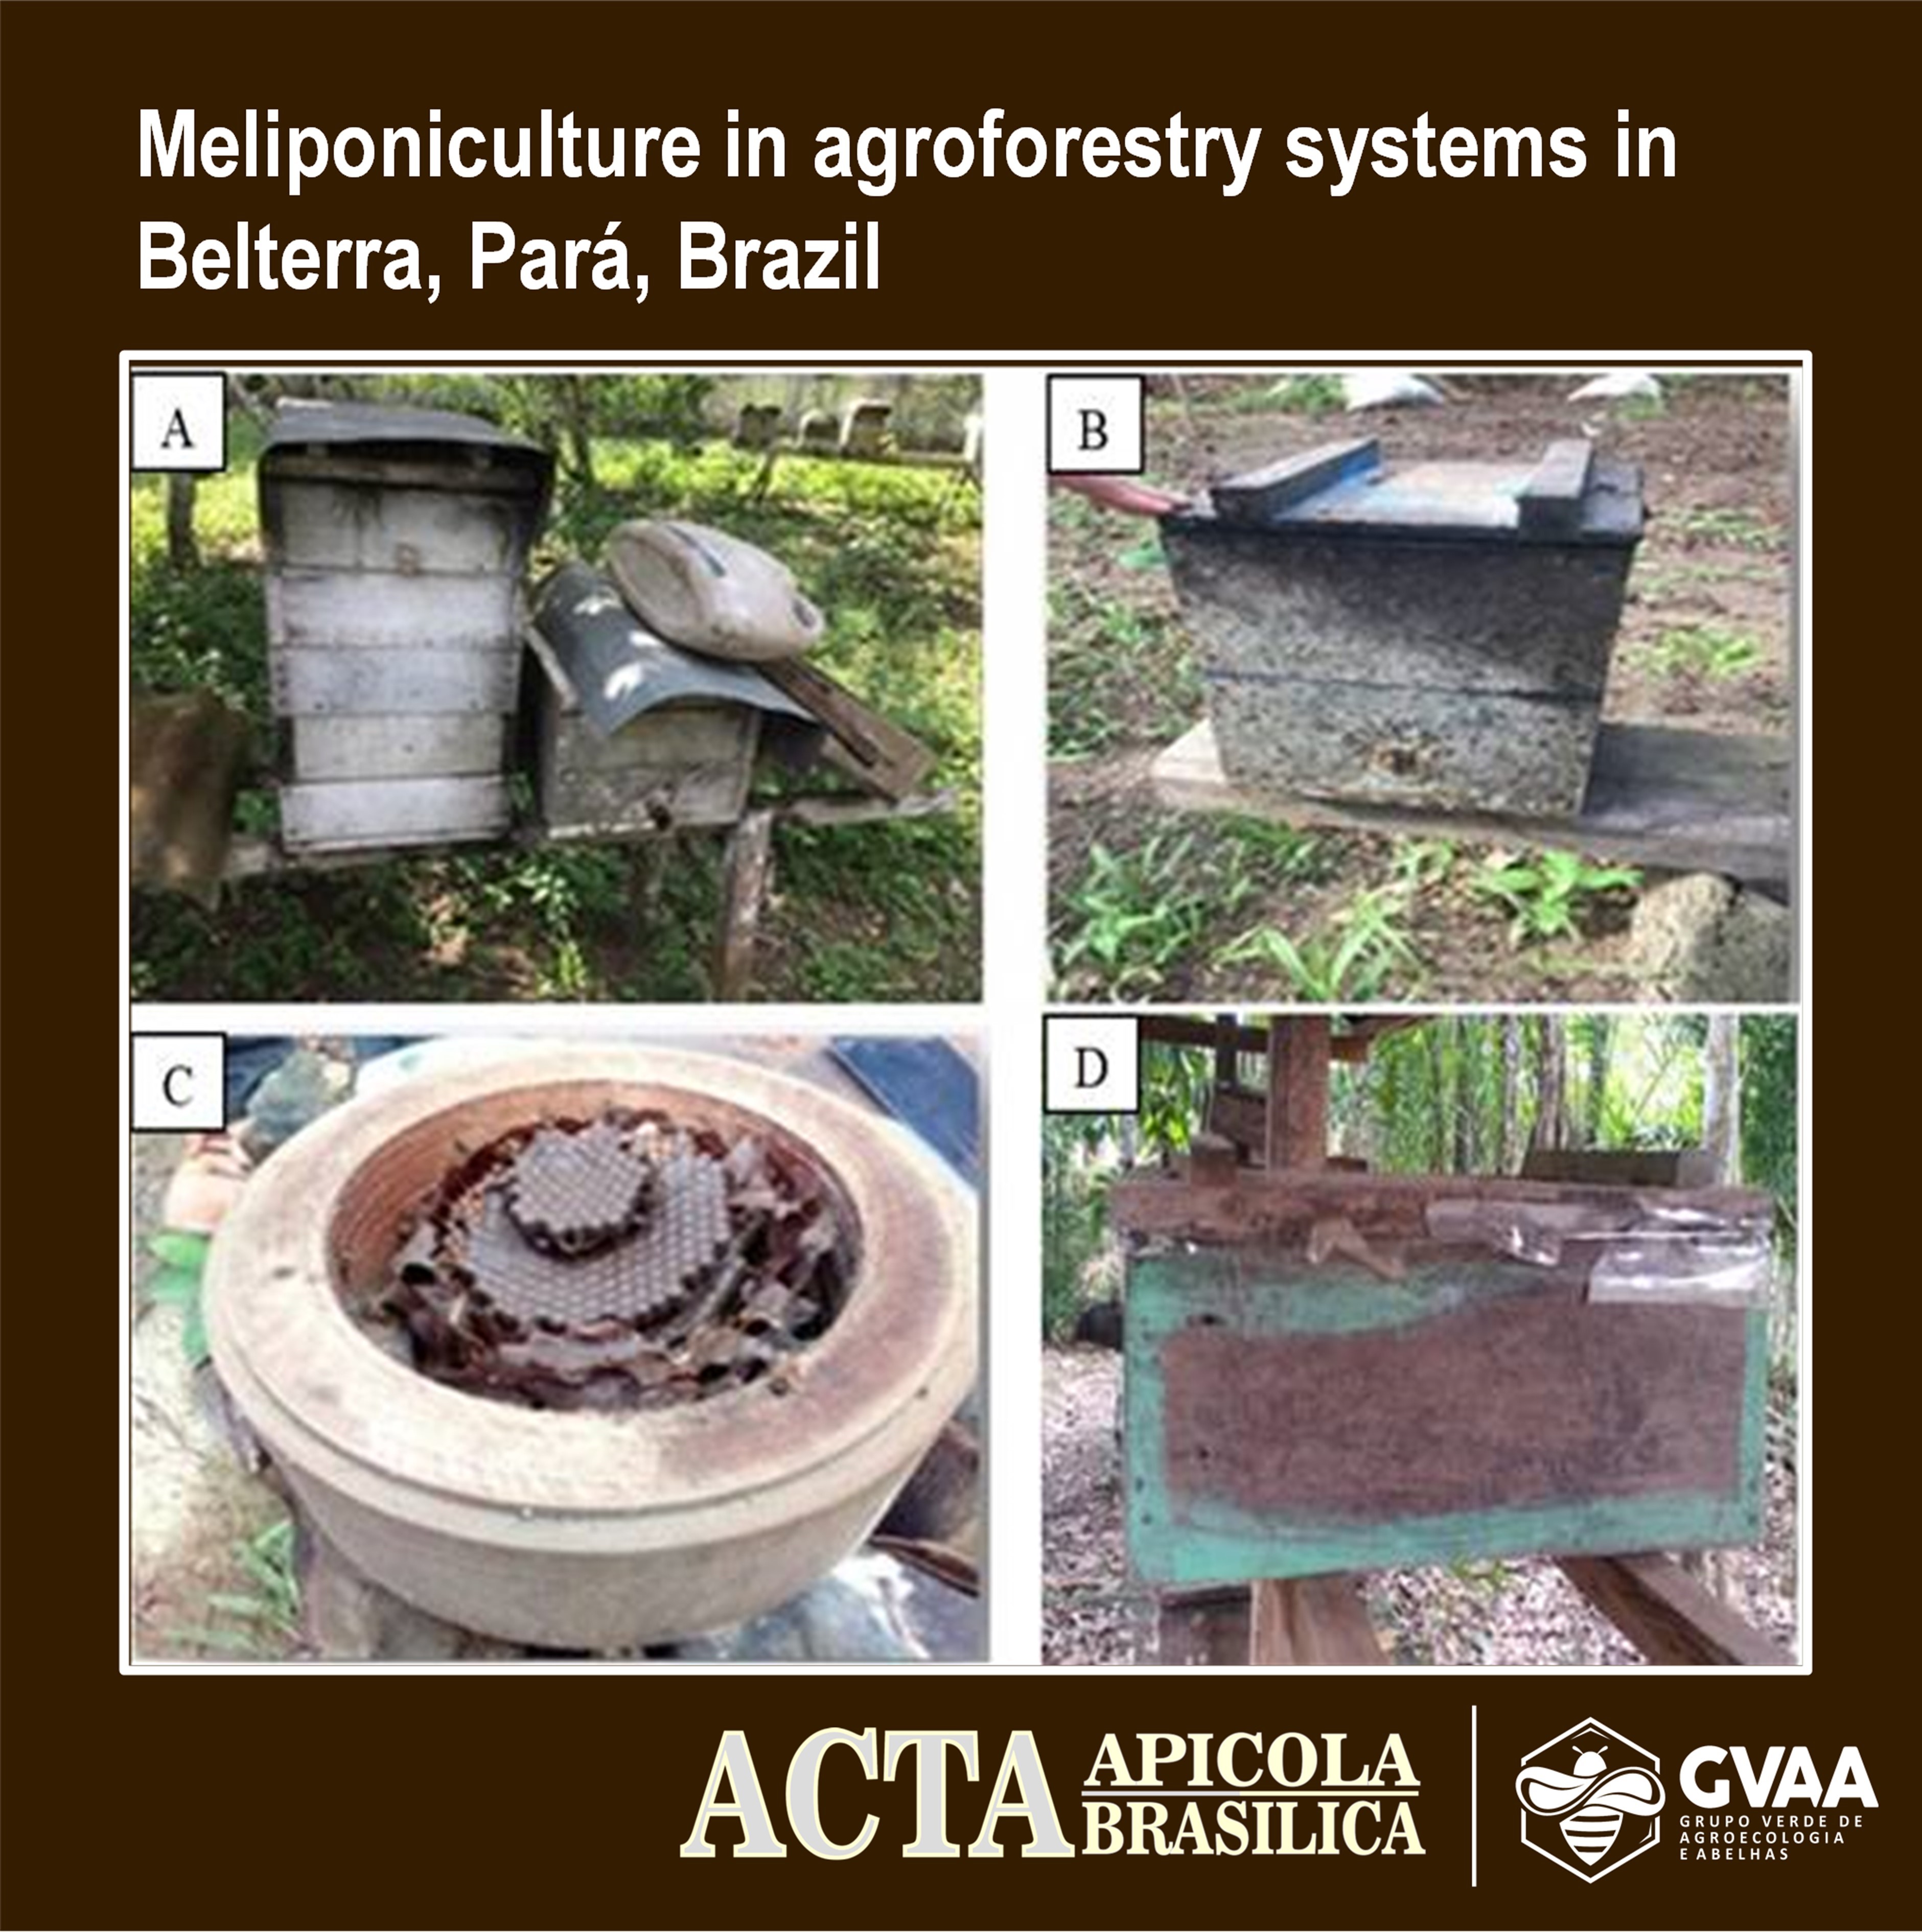 Meliponiculture in agroforestry systems in Belterra, Pará, Brazil